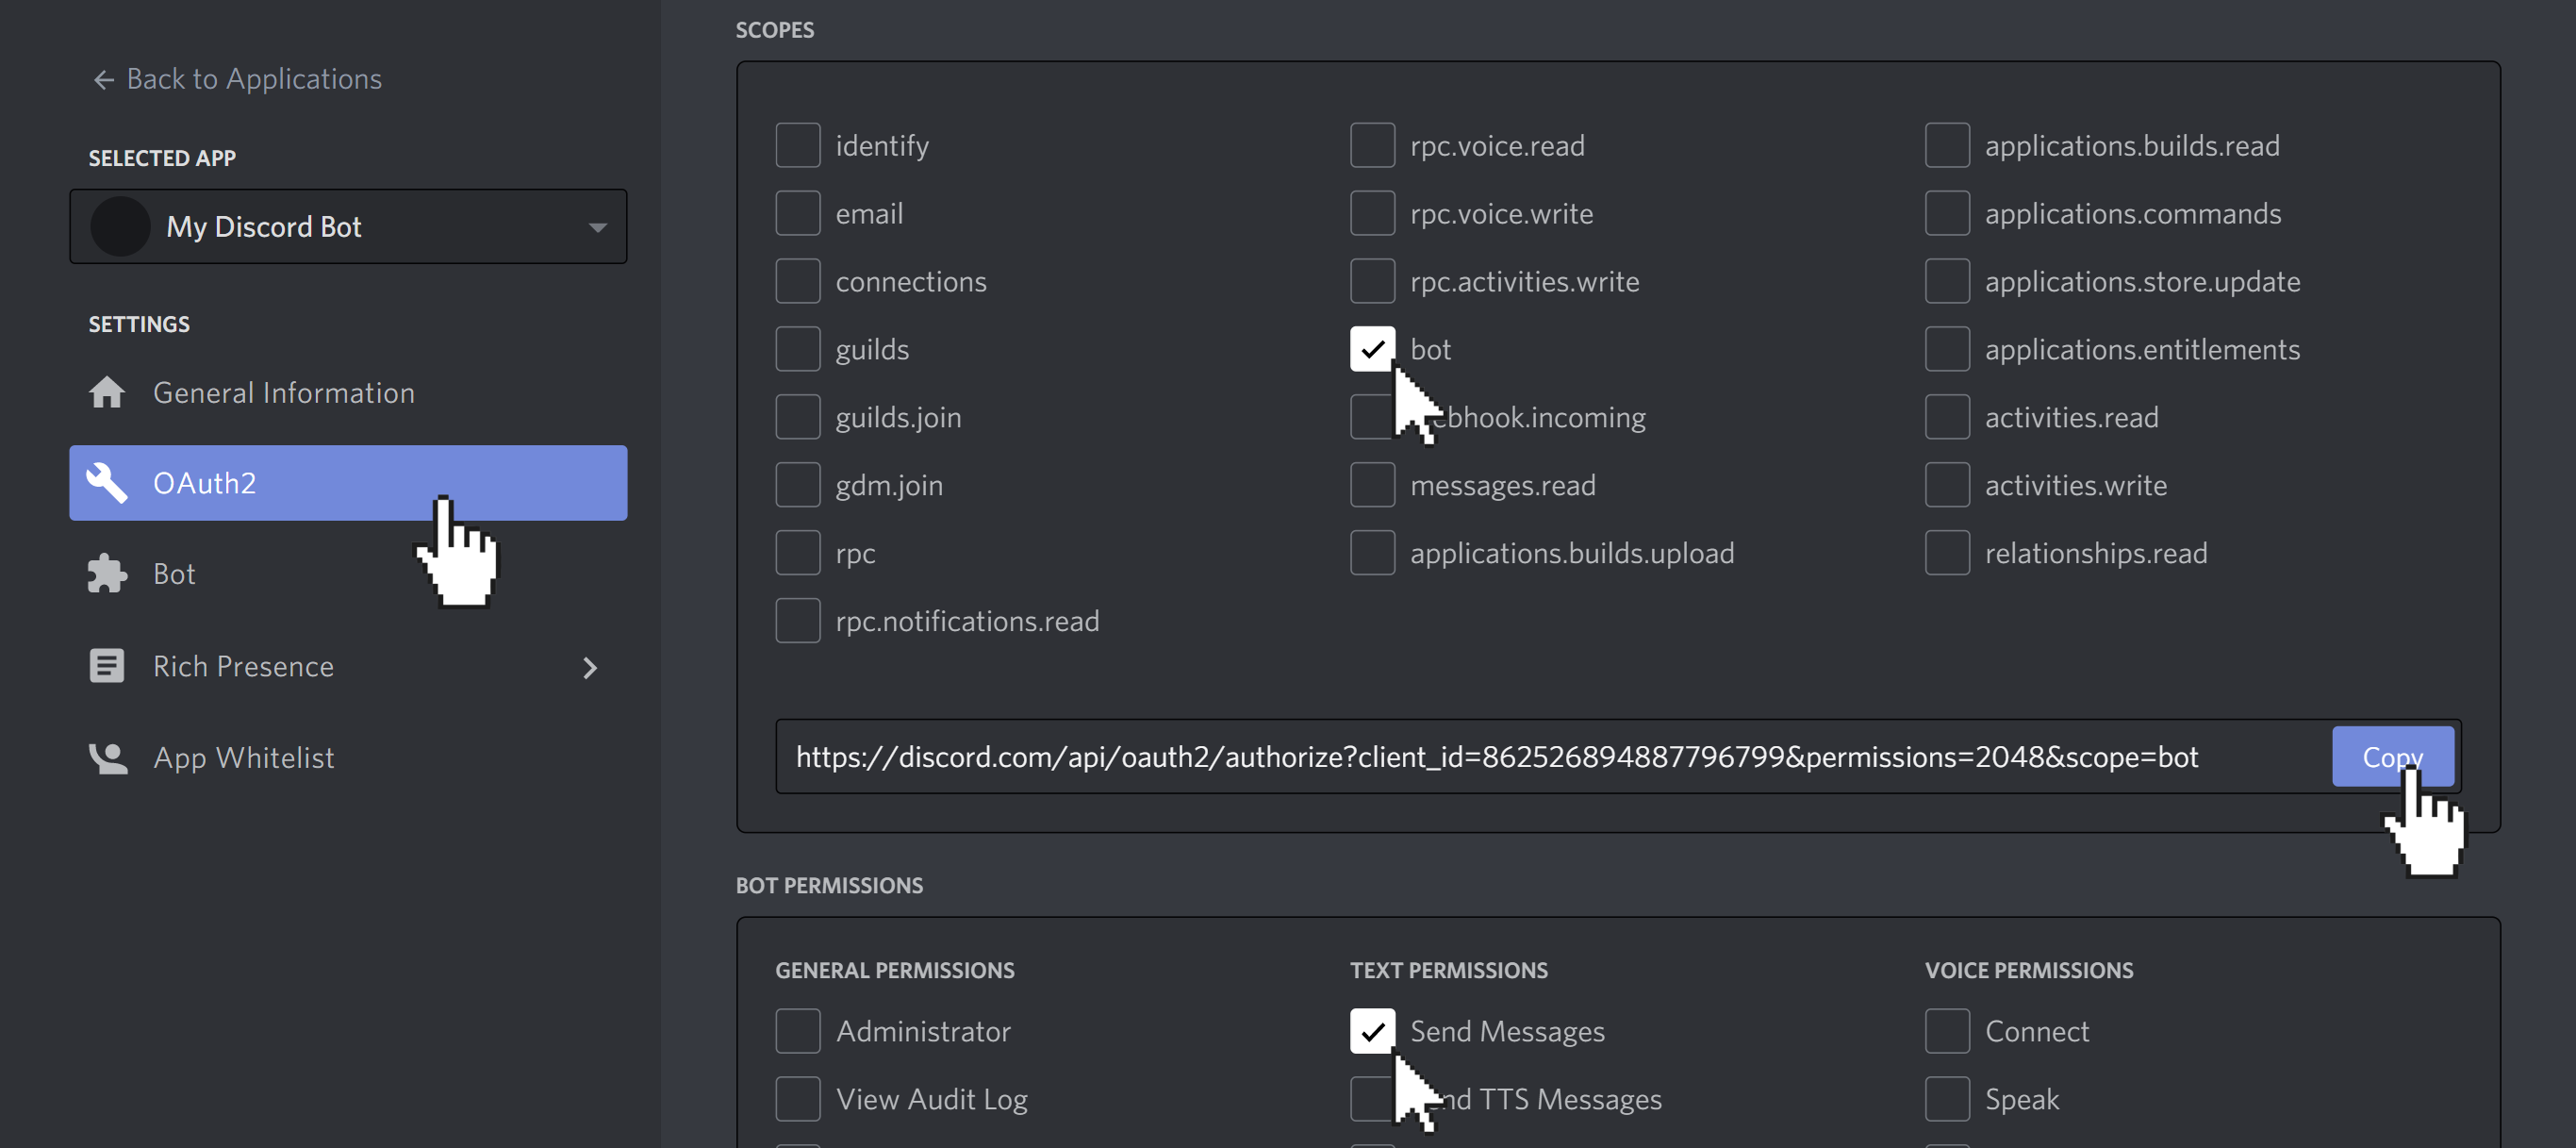 OAuth2 tab of Discord application with bot role and &quot;Send Messages&quot; permission enabled. The cursor is clicking on the &quot;Copy&quot; button to copy the OAuth2 URL.